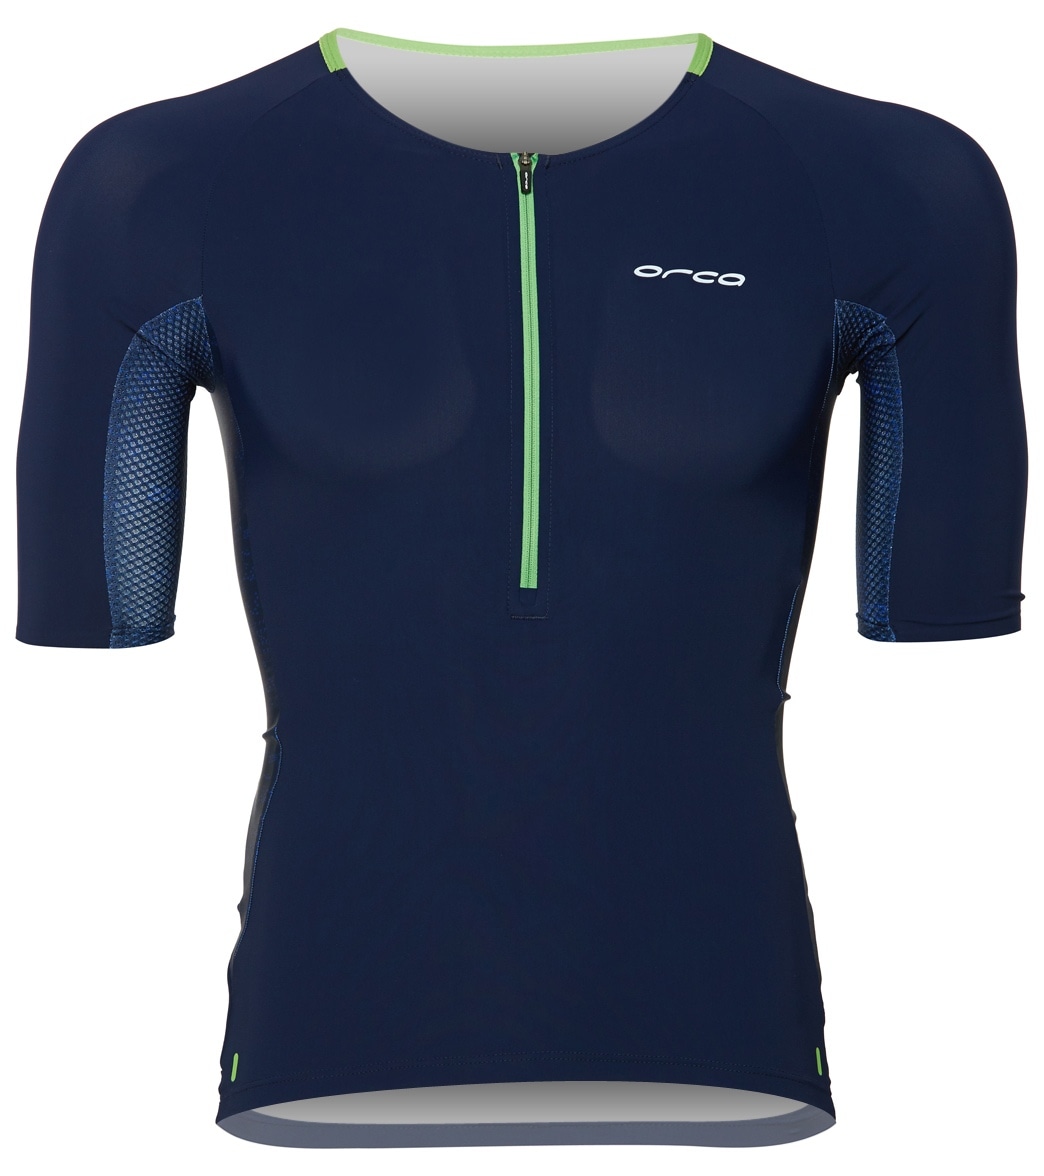 Orca Men's 226 Perform Tri Jersey at SwimOutlet.com - Free Shipping